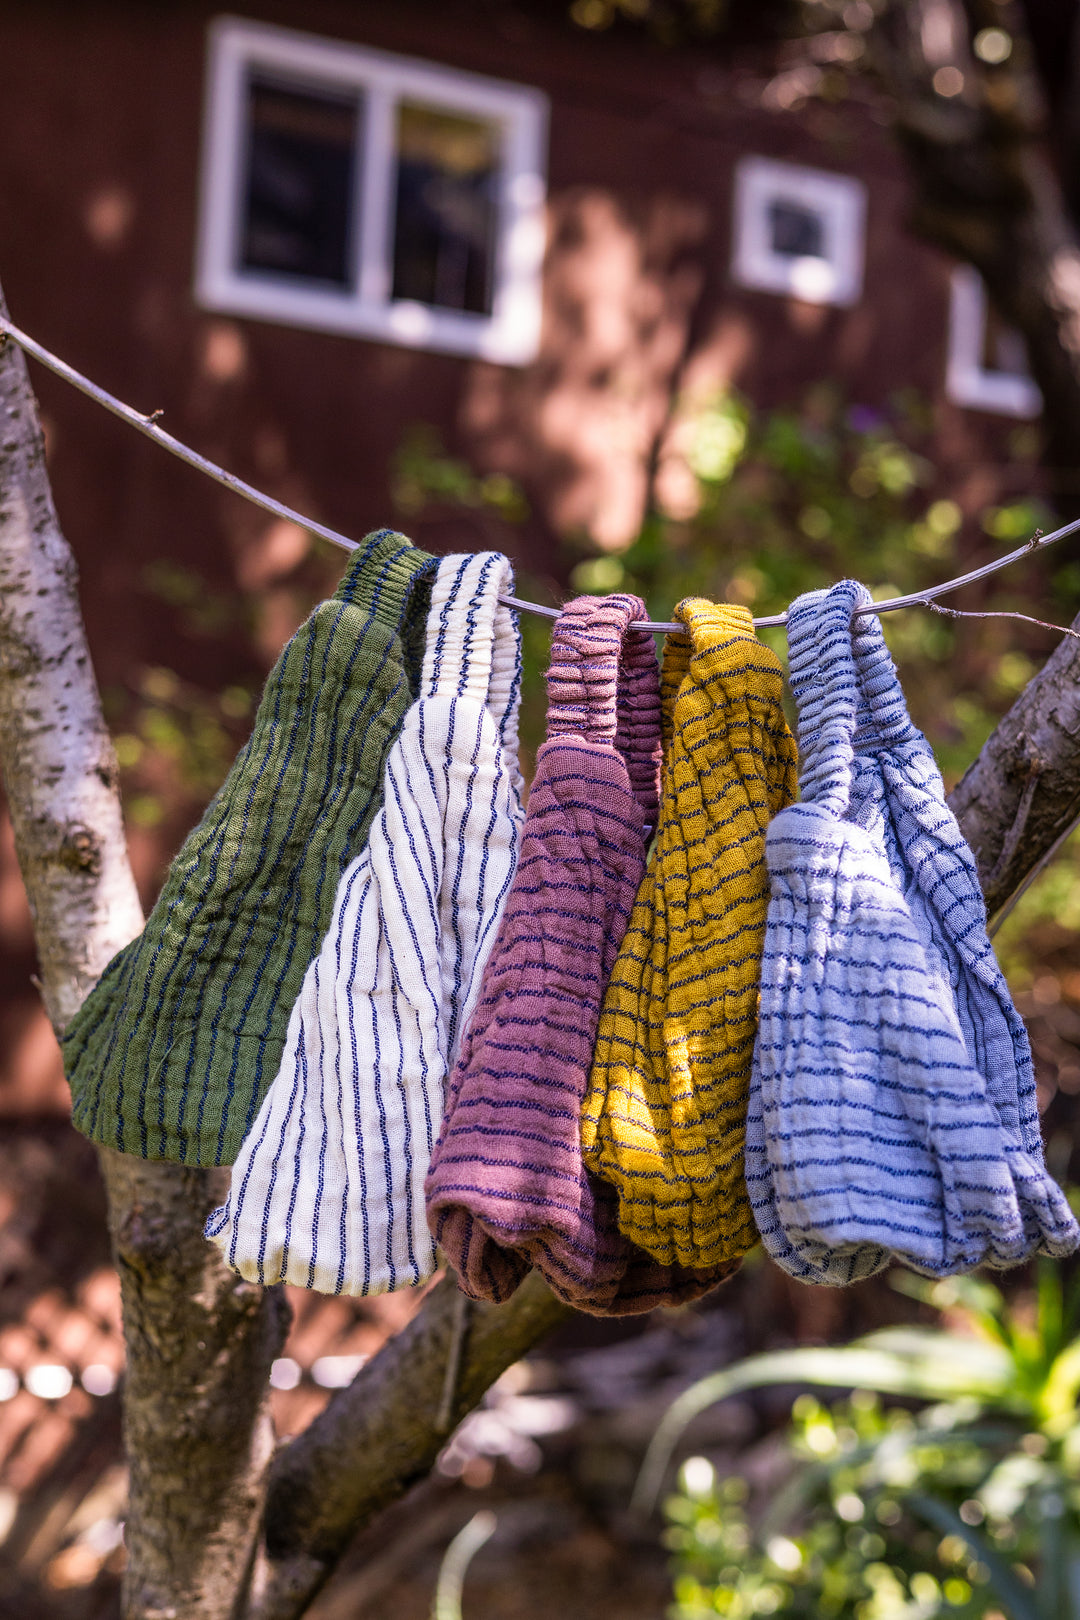 Headbands of various colors hang from clothesline.